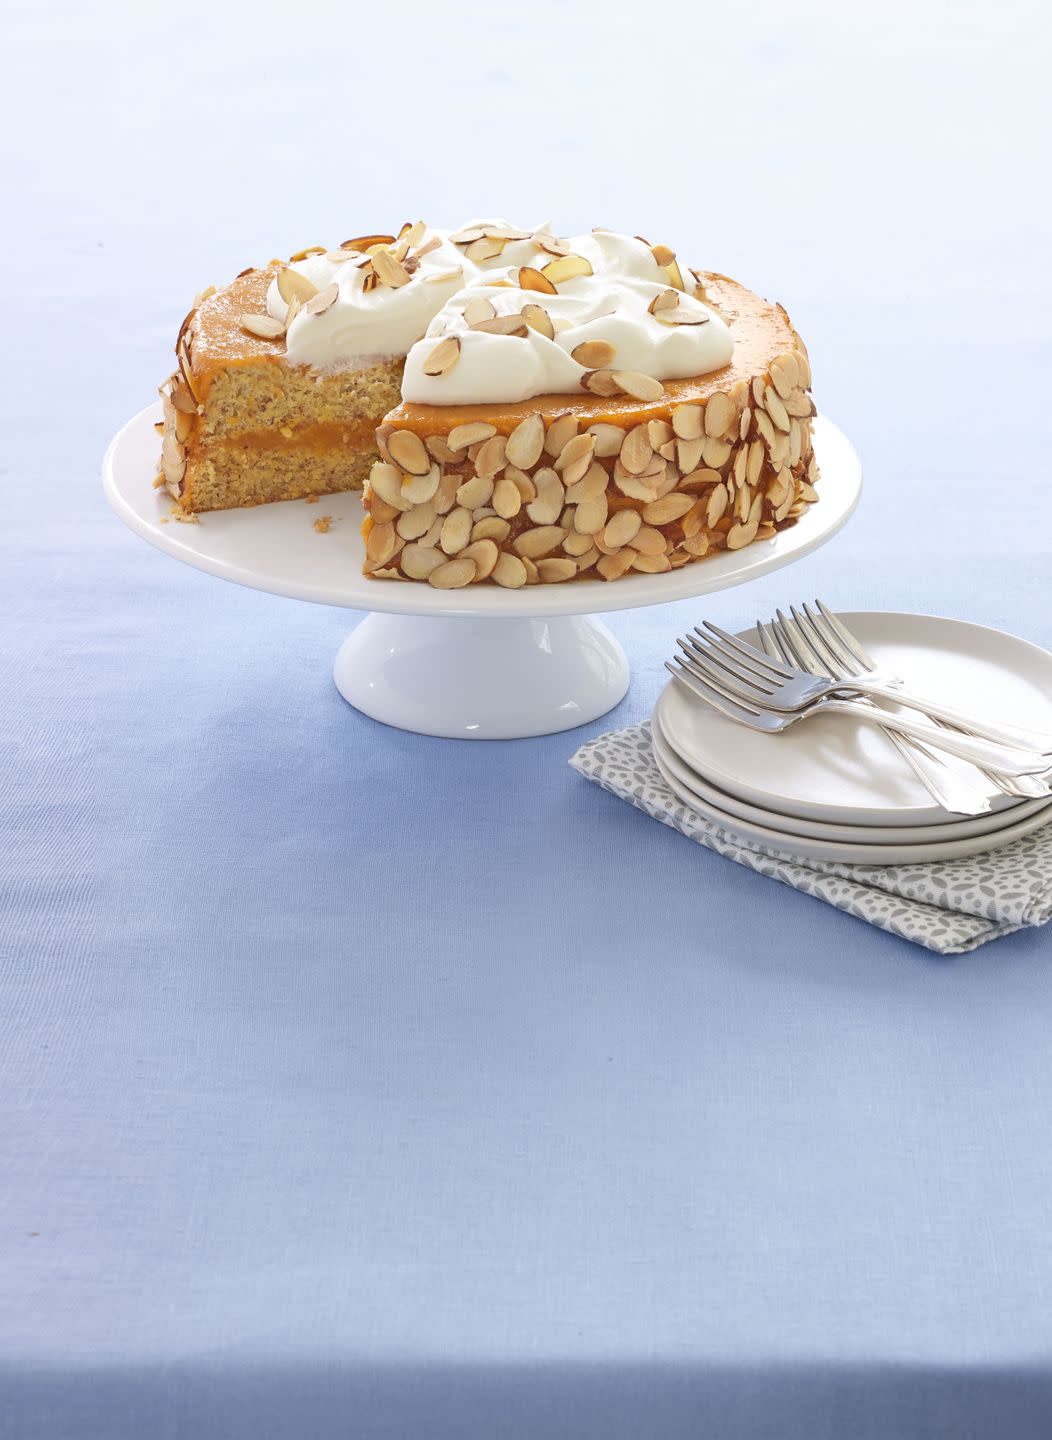 almond apricot cake with cream on top, served on a cake stand